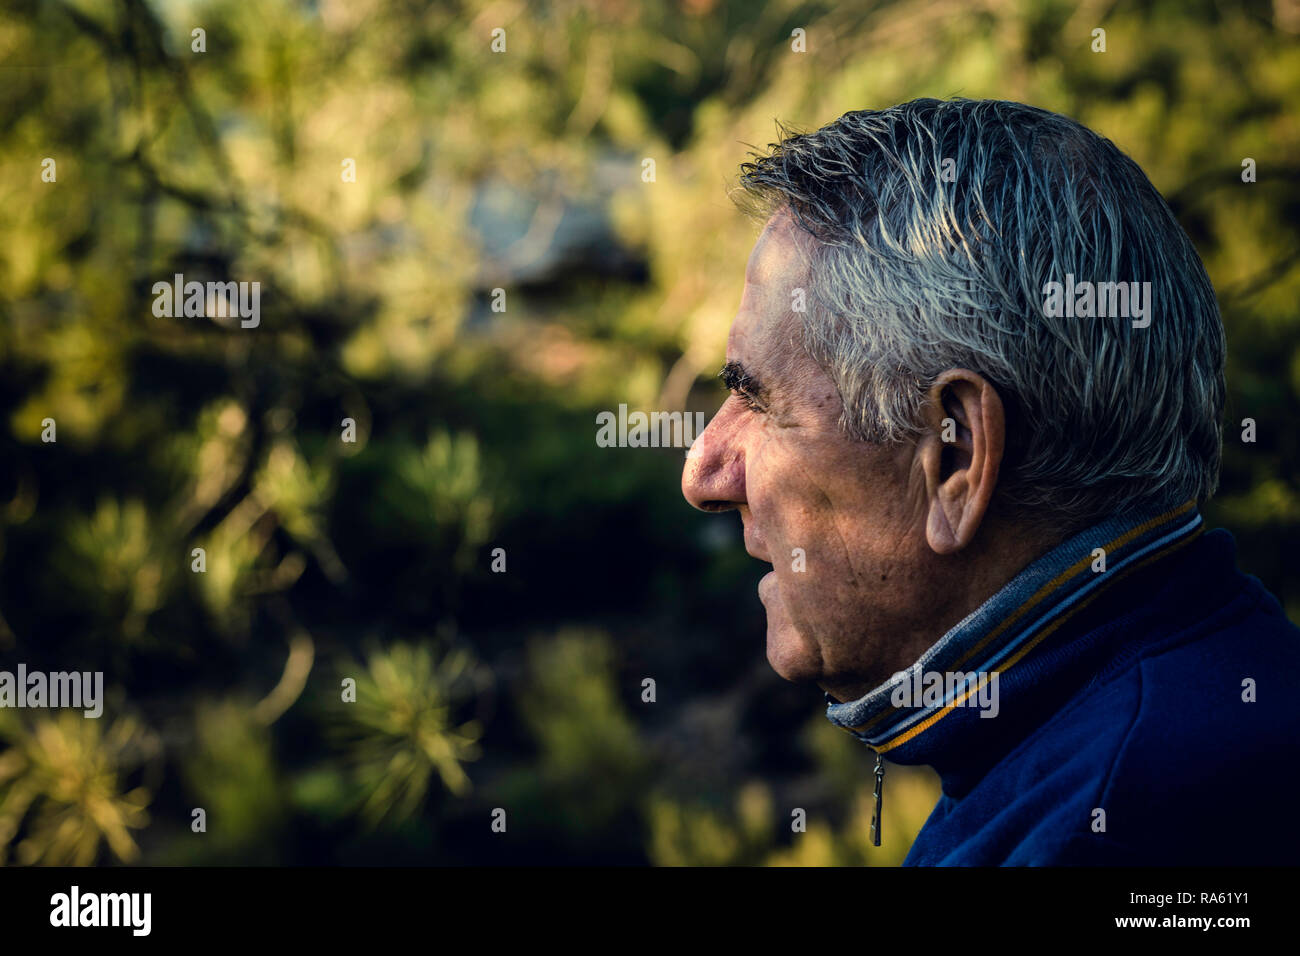 Attractive senior man with gray hair looking in foreground with vegetation background Stock Photo